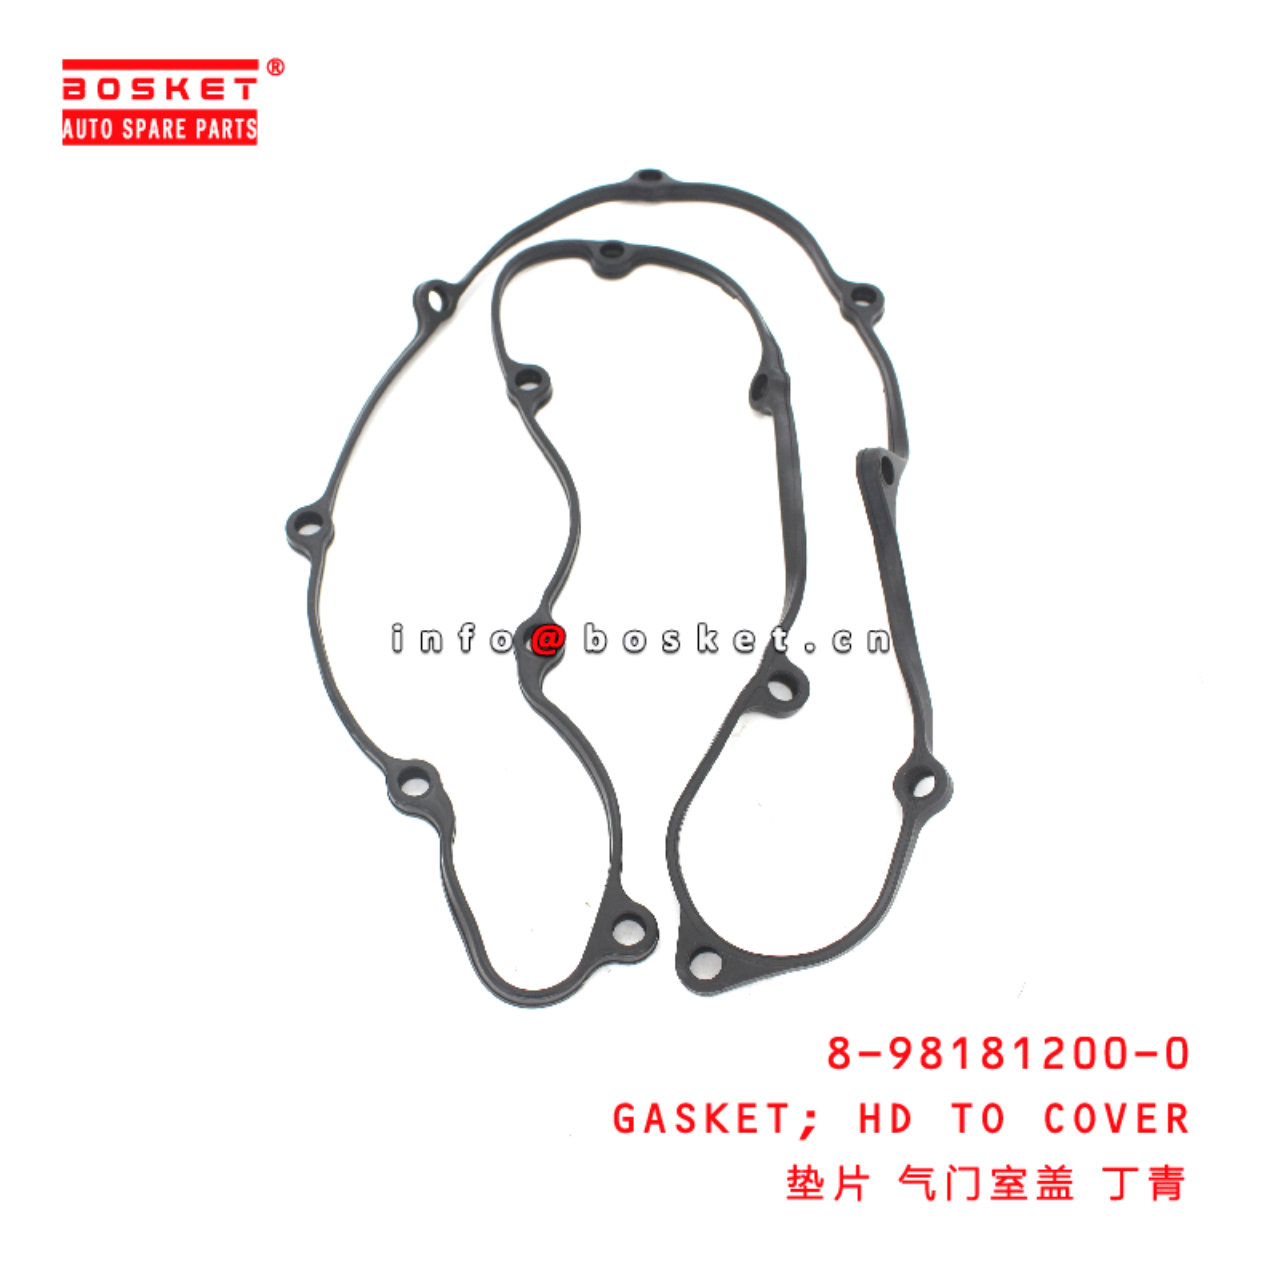 8-98181200-0 Head To Cover Gasket suitable for ISUZU NKR55 4JJ1 8981812000